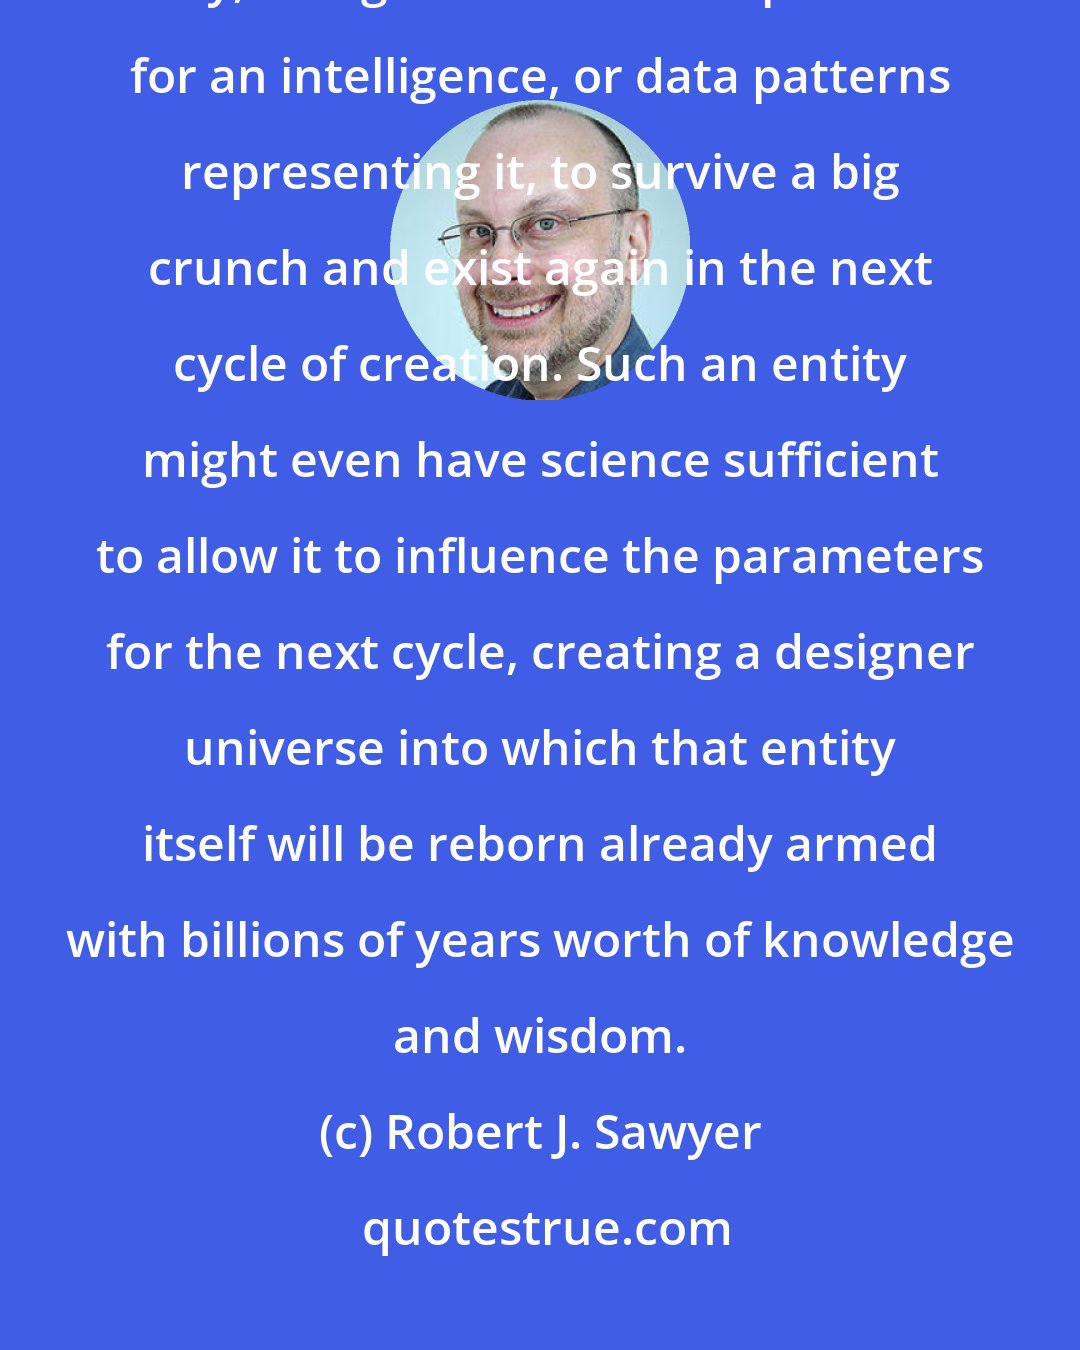 Robert J. Sawyer: With billions of years, who knows what science might make possible? Why, it might even make it possible for an intelligence, or data patterns representing it, to survive a big crunch and exist again in the next cycle of creation. Such an entity might even have science sufficient to allow it to influence the parameters for the next cycle, creating a designer universe into which that entity itself will be reborn already armed with billions of years worth of knowledge and wisdom.